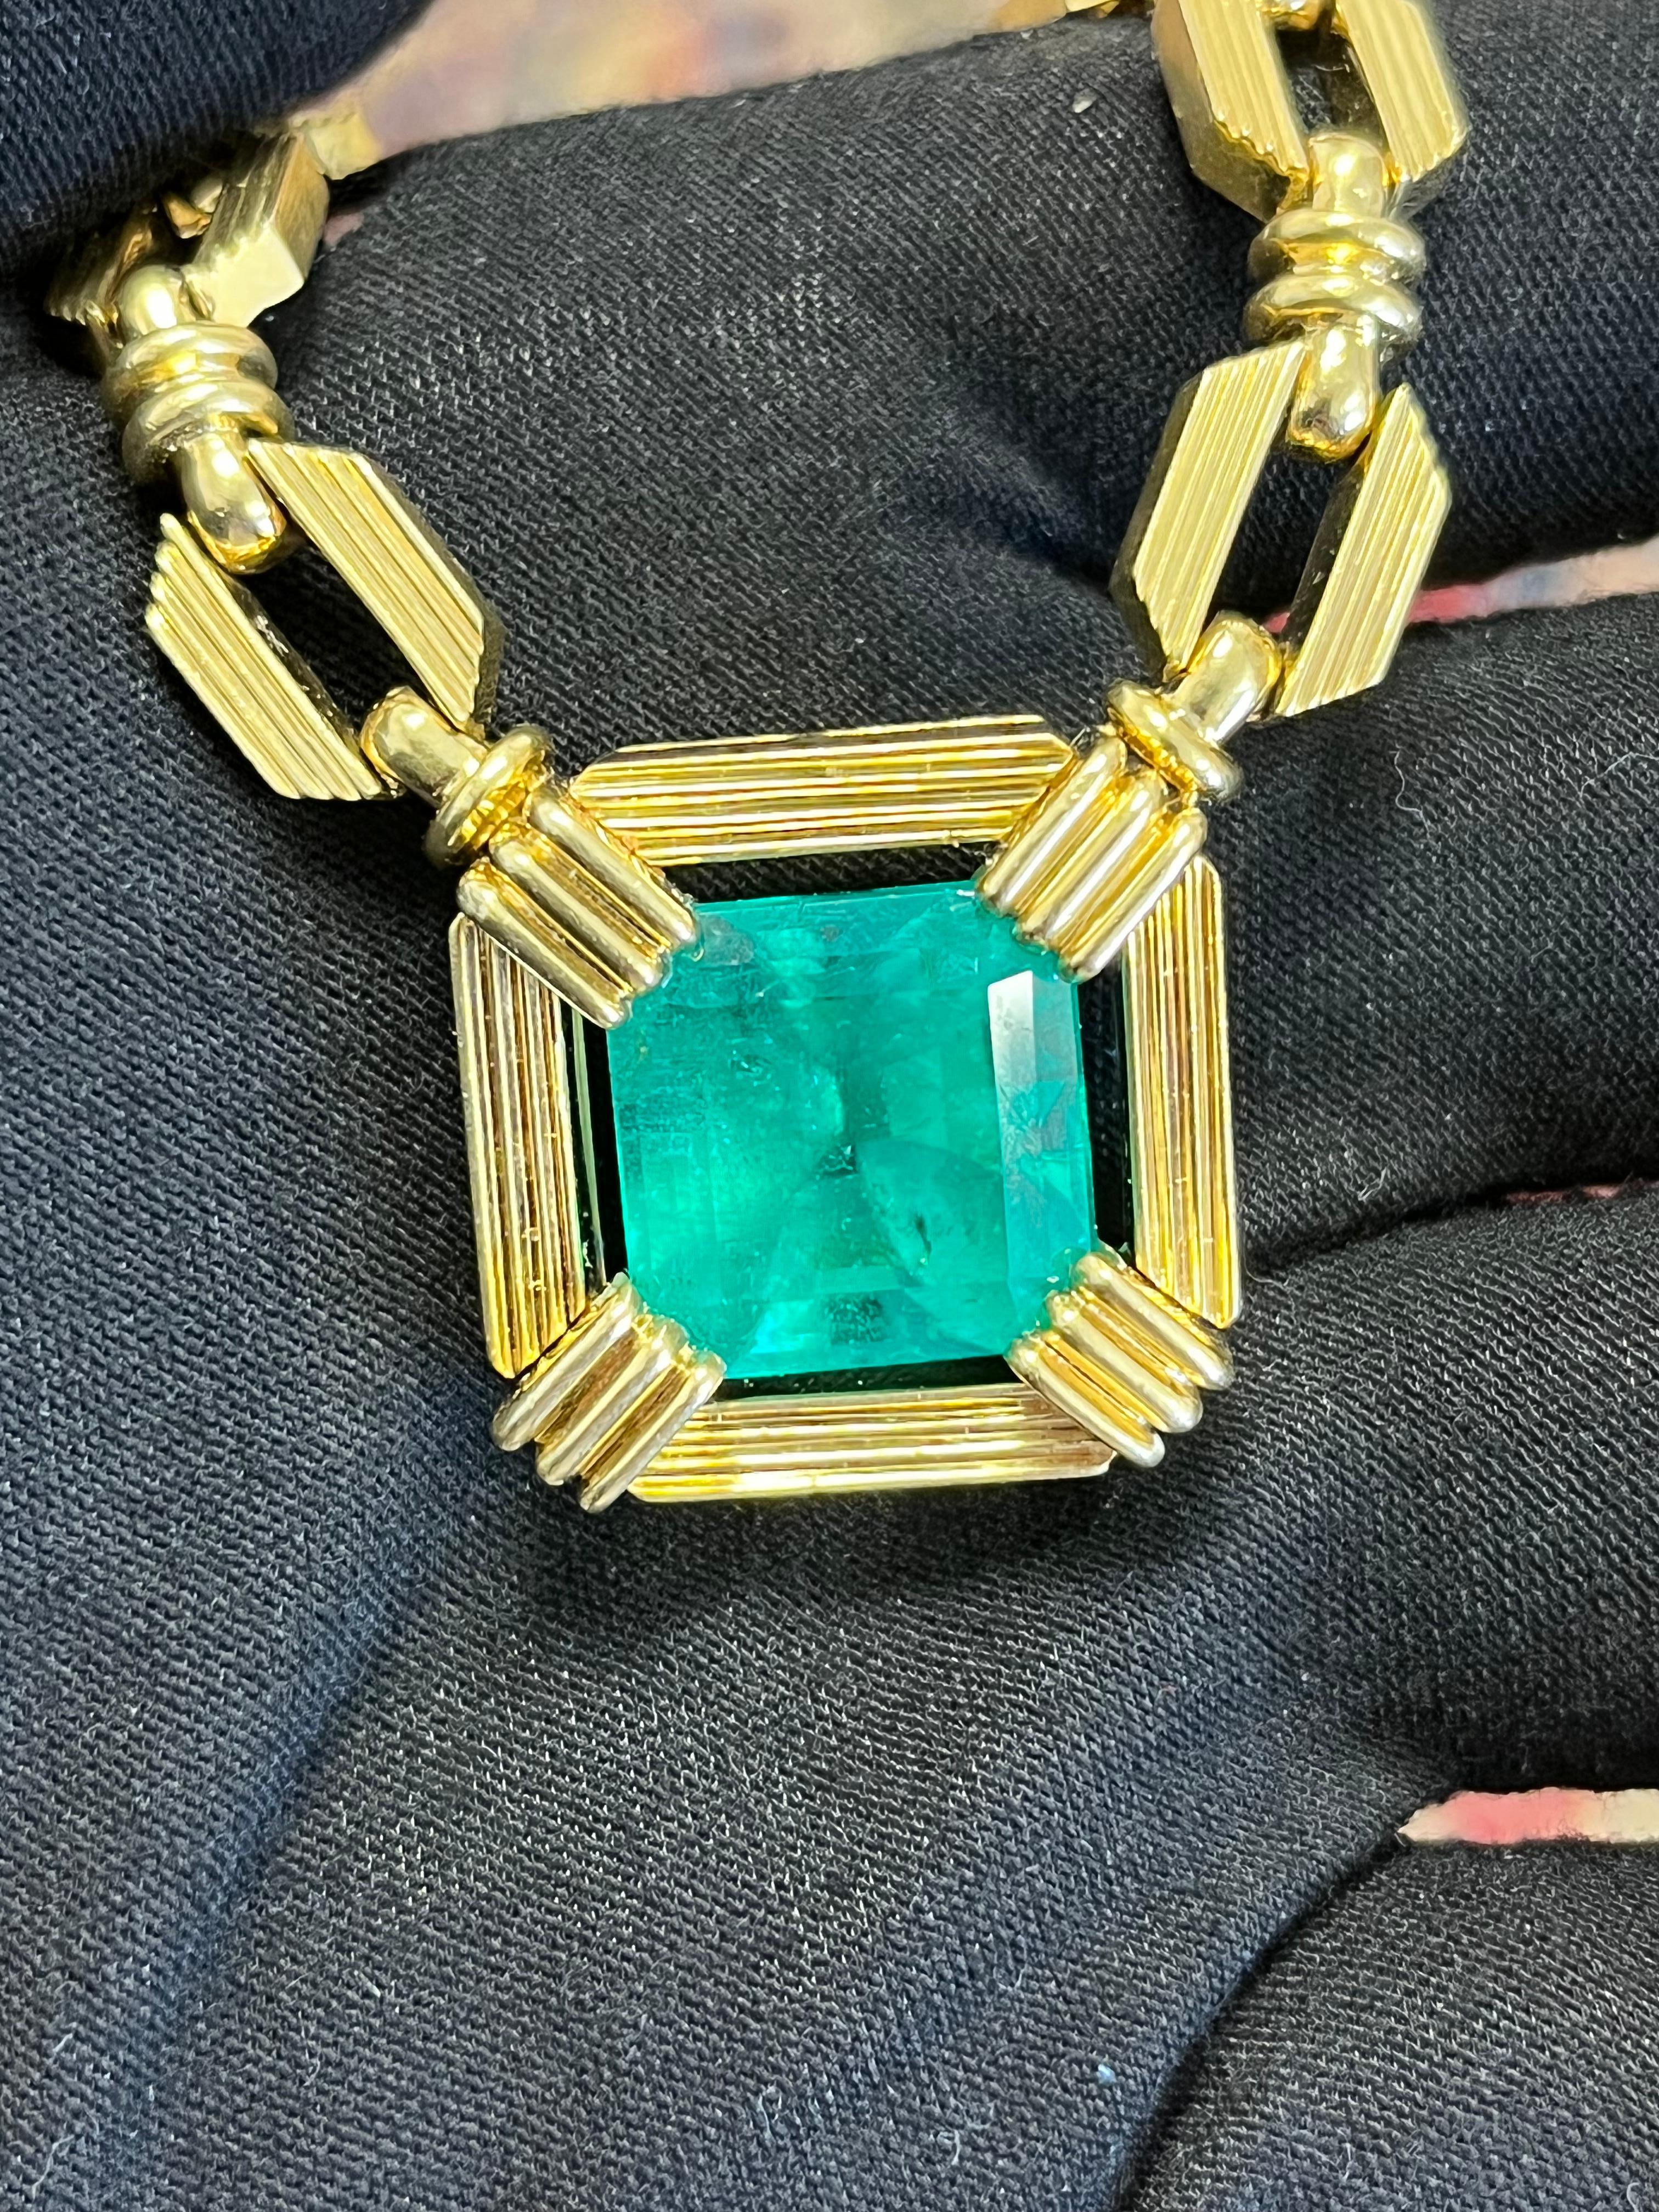 Henry Dunay Signed 19.48 Carat Colombian Emerald Necklace in 18k Yellow Gold For Sale 6